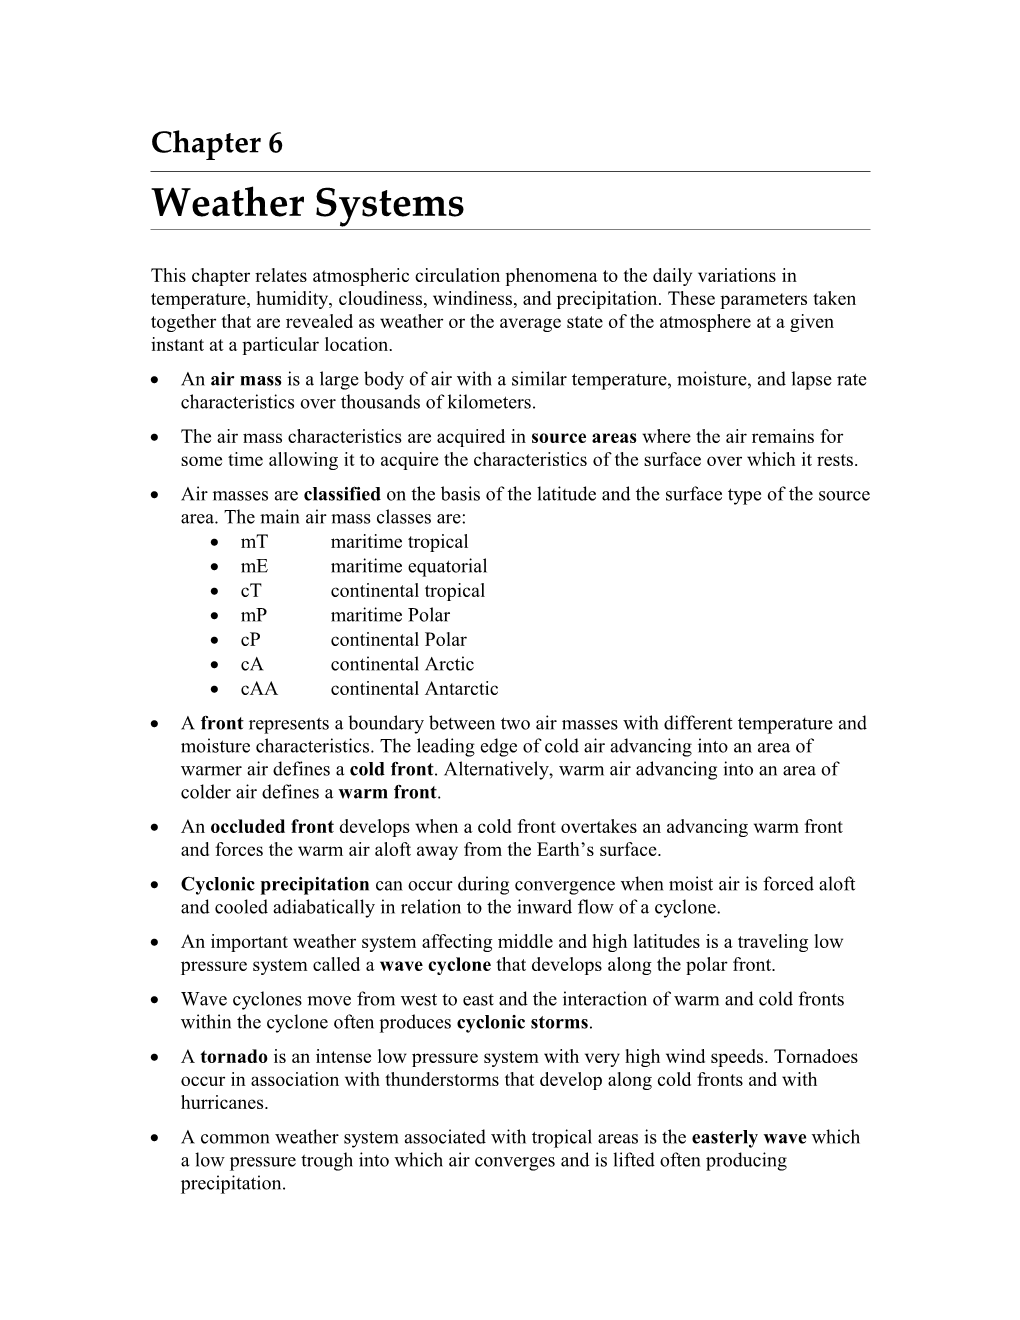 Weather Systems